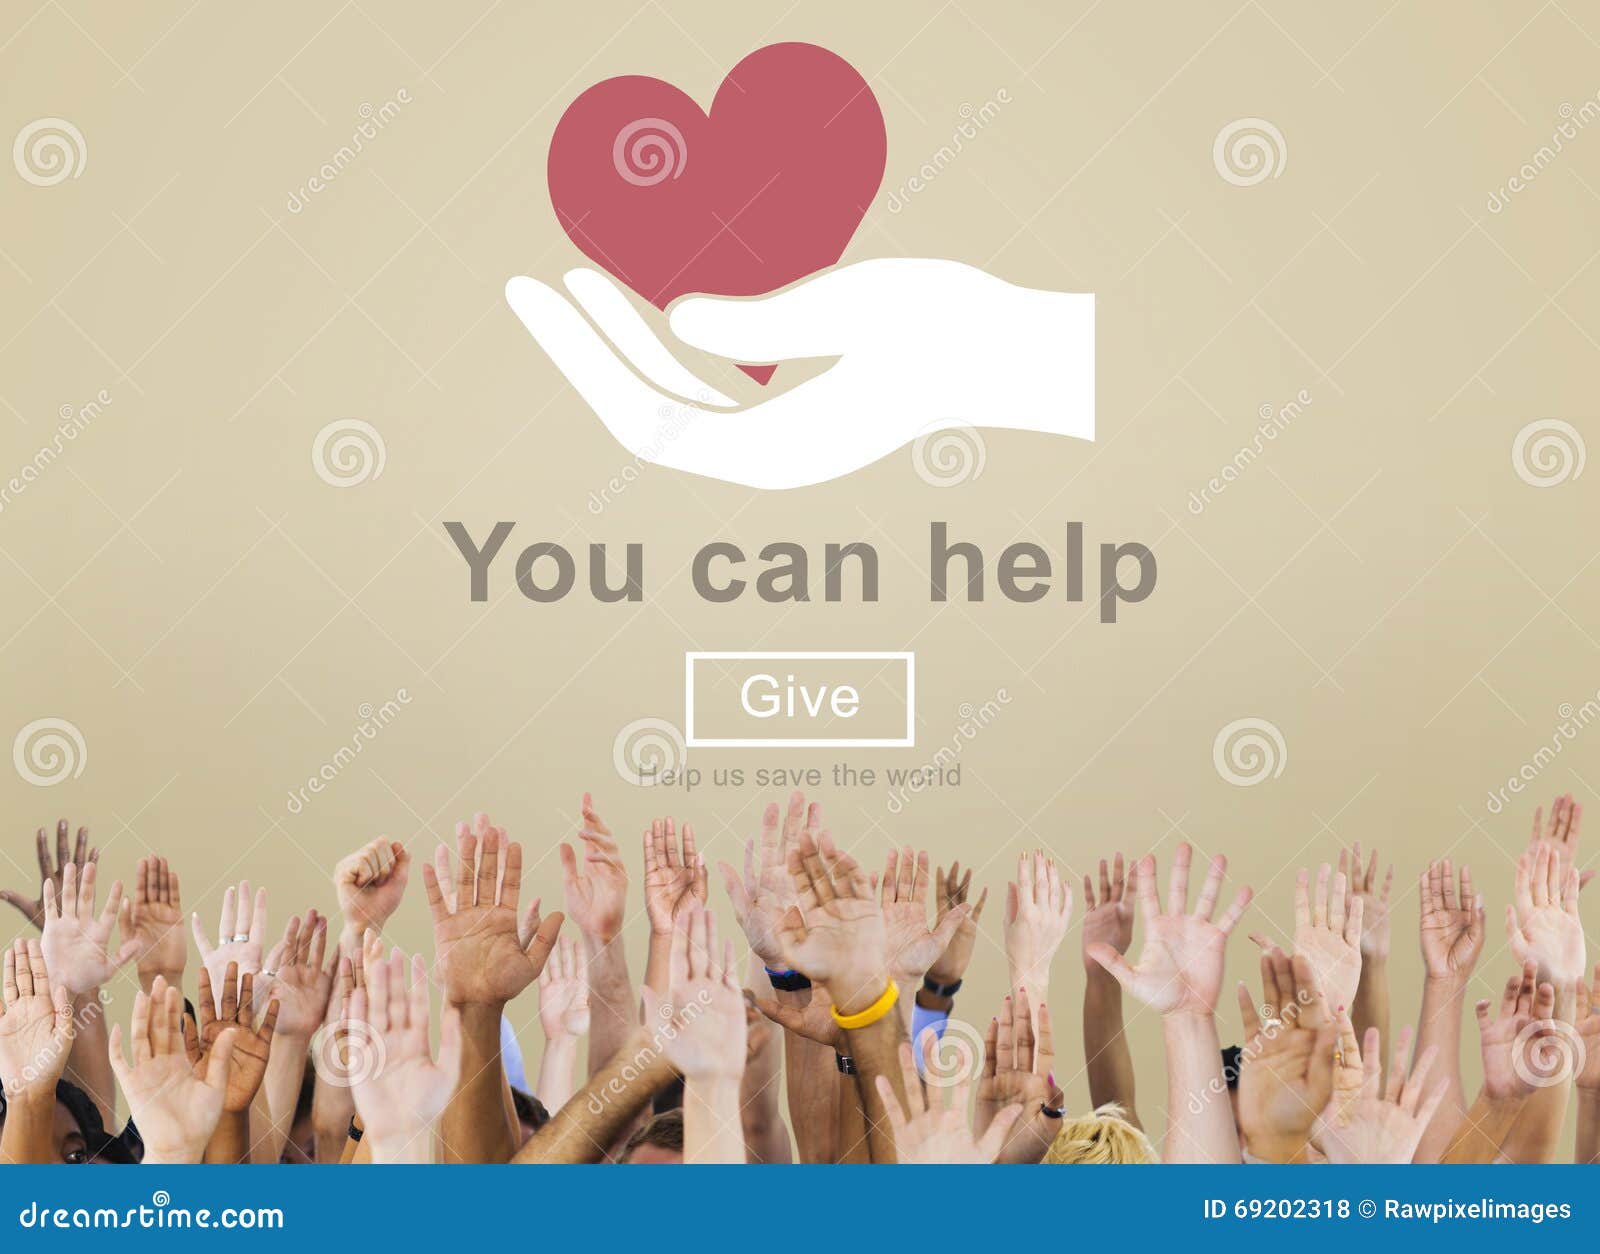 you can help give welfare donate concept